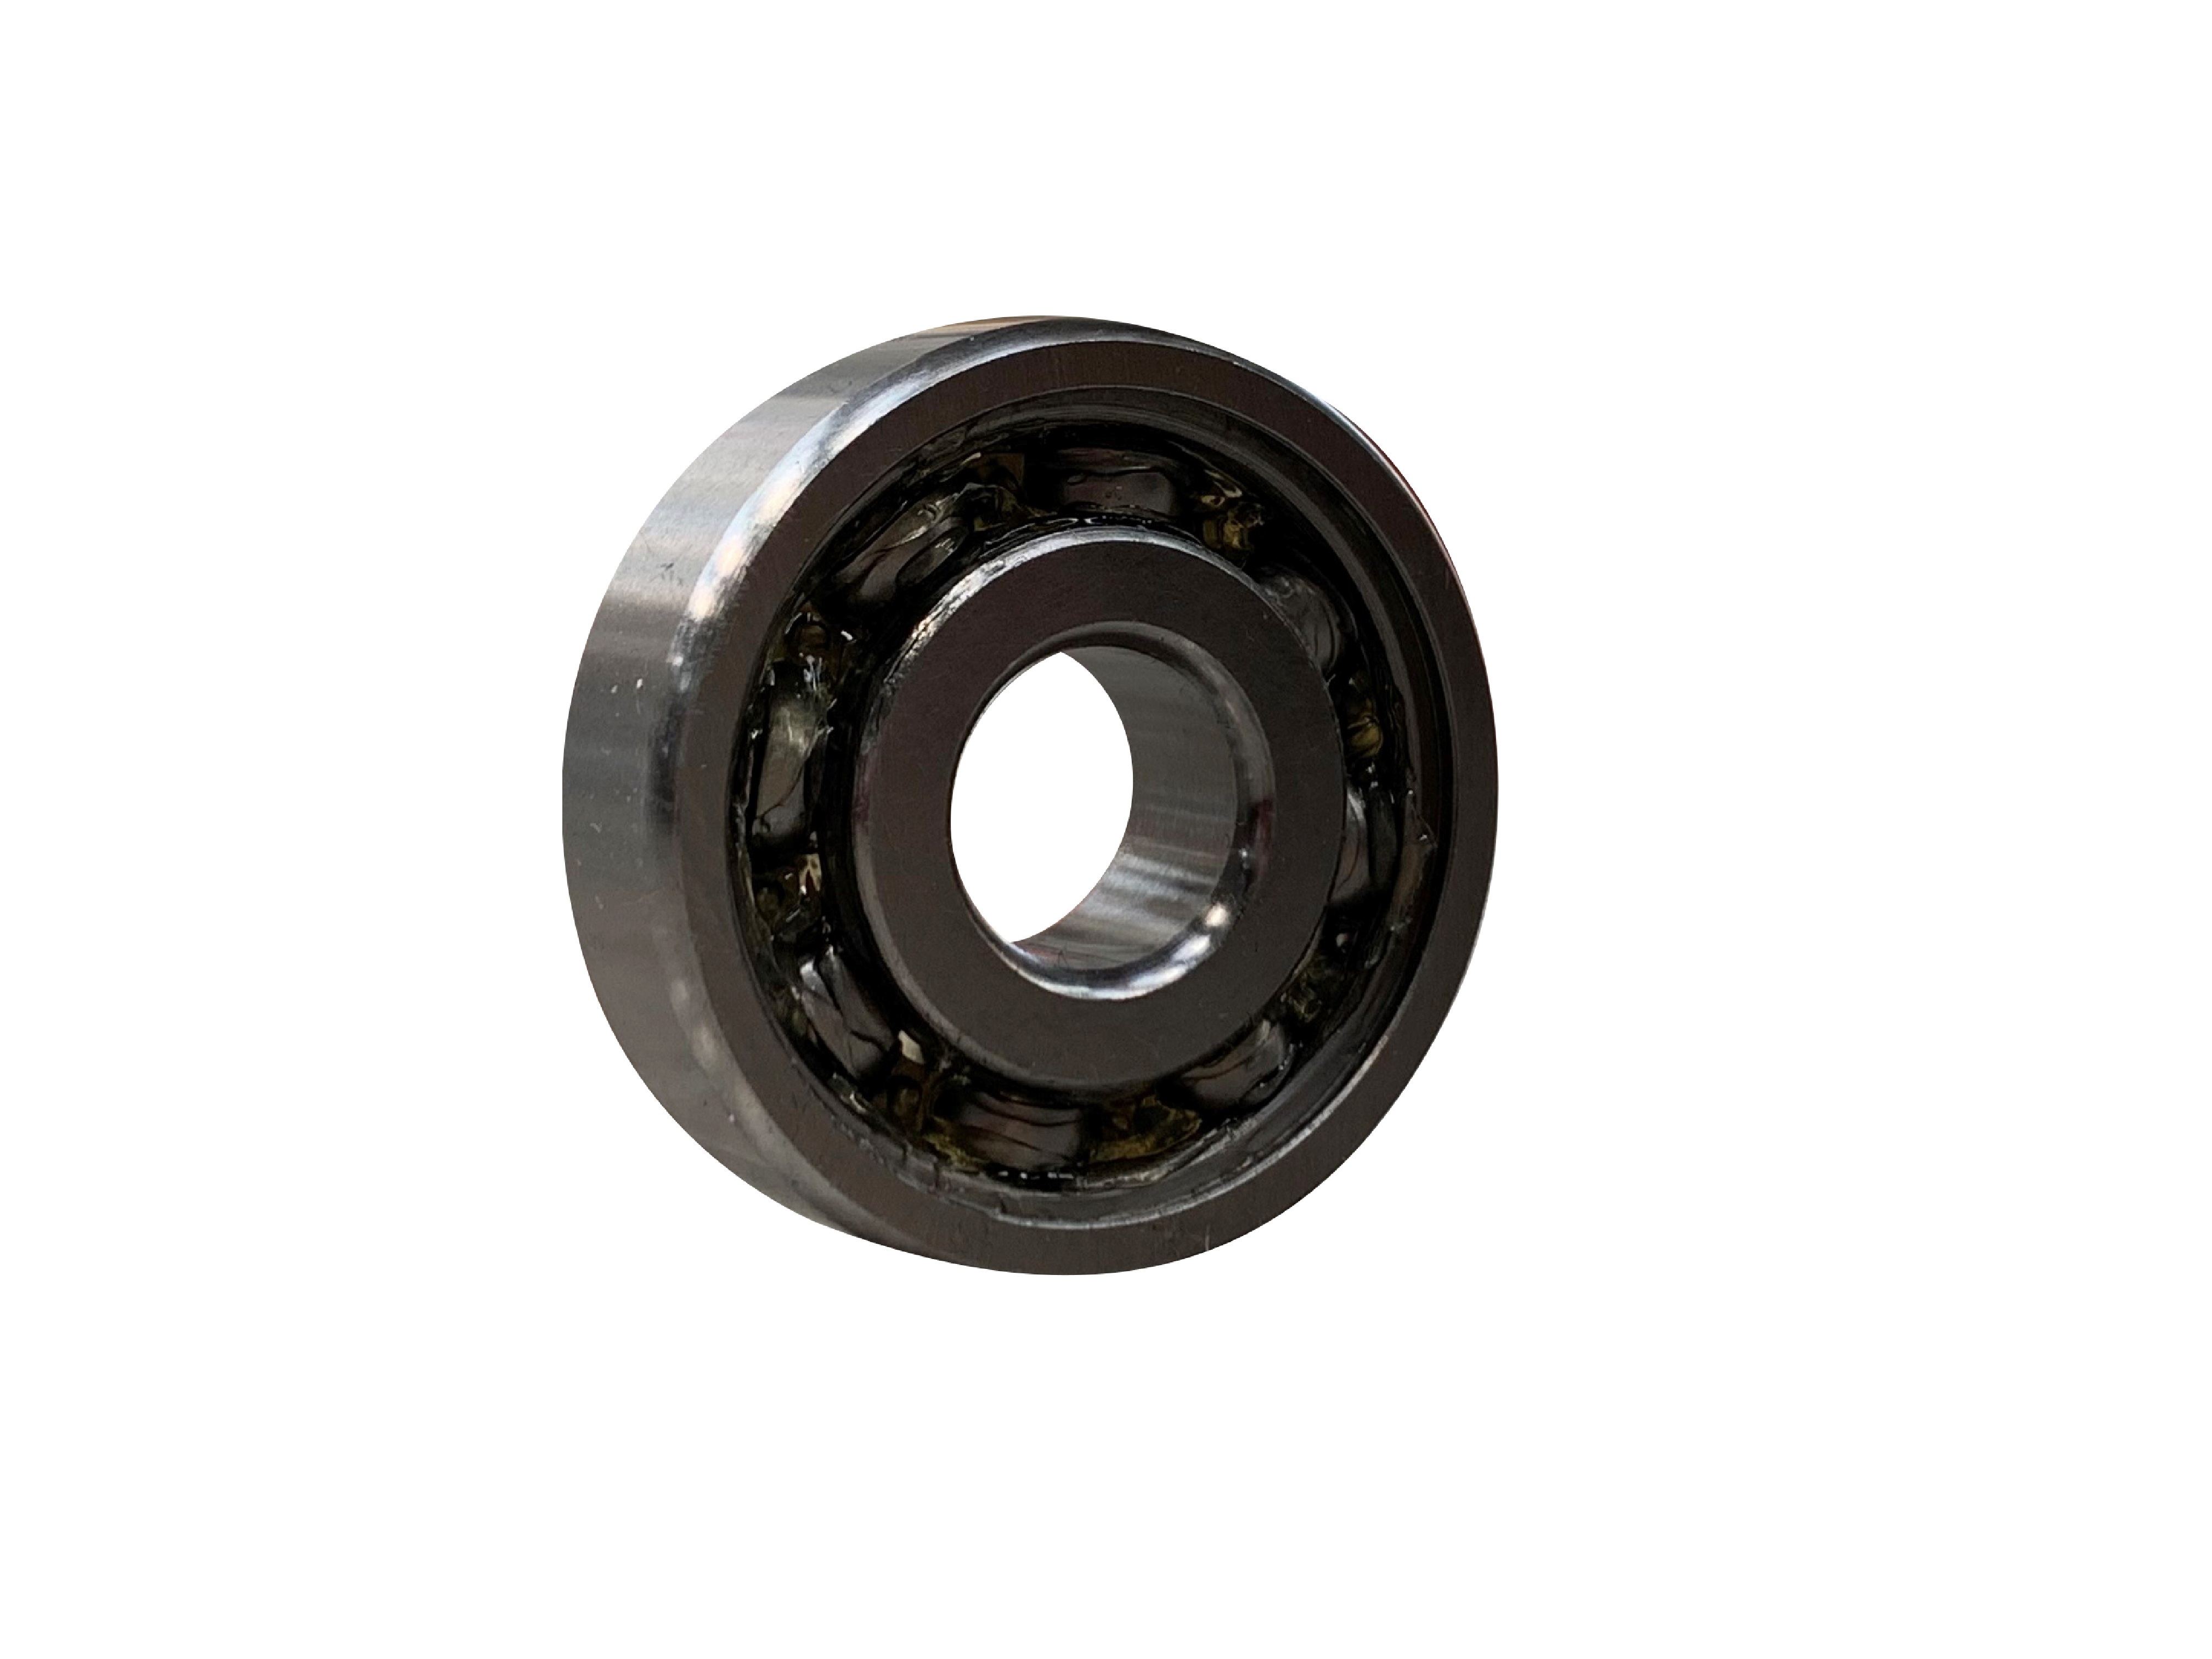 MJ5/8 Imperial Open Ball Bearing (RMS5) 5/8 x 1-13/16 x 5/8